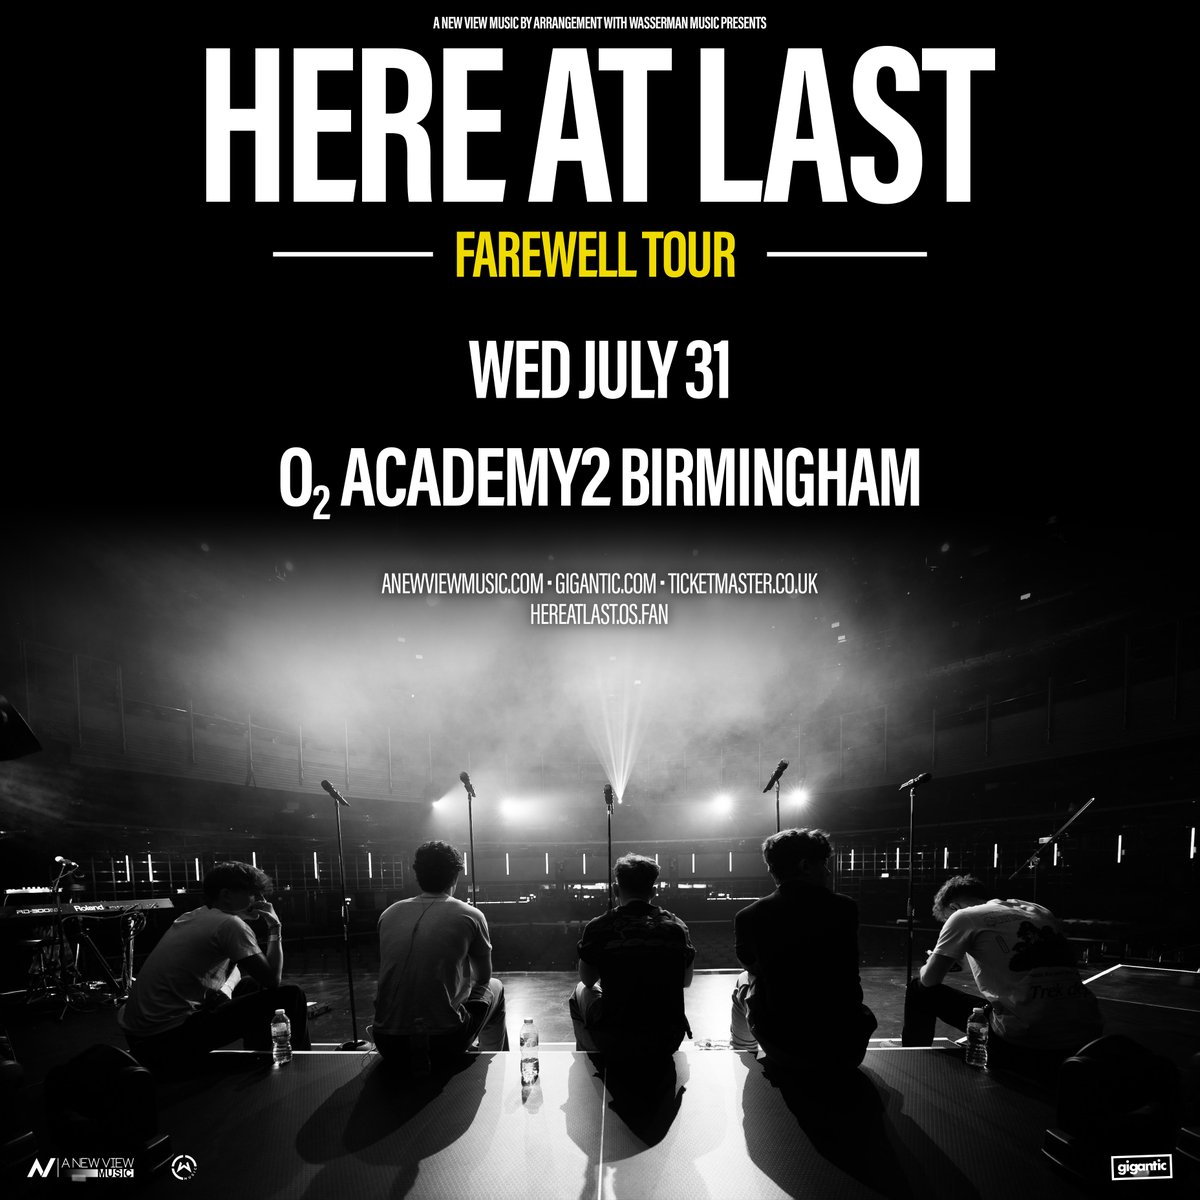 It's the end of the road....almost! Priority Tickets available for @hereatlastband - The Farewell Tour - Wednesday 31 July - amg-venues.com/QILU50REBnG